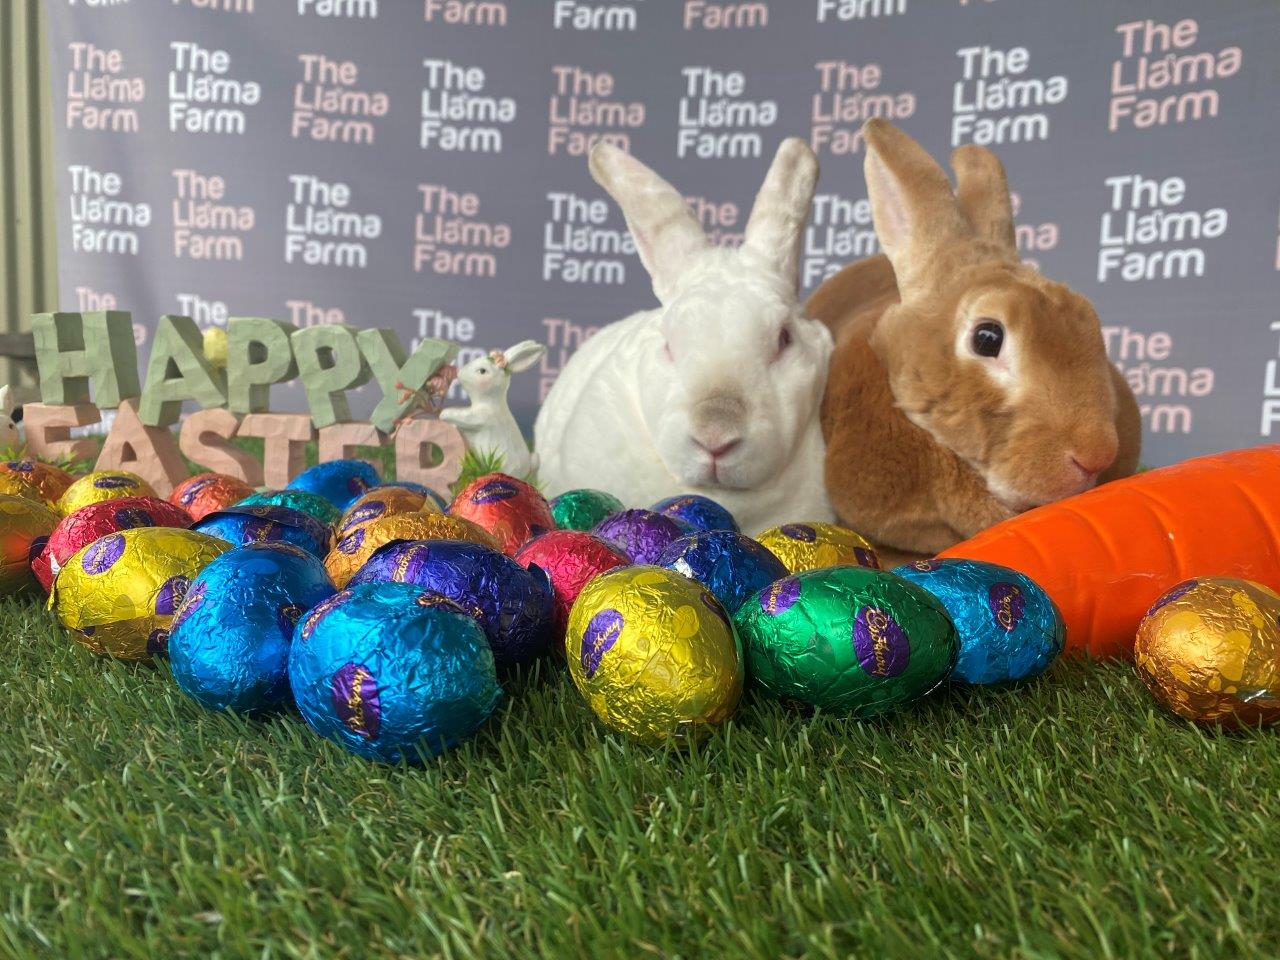 Bunny photos are back at The Llama Farm this Easter